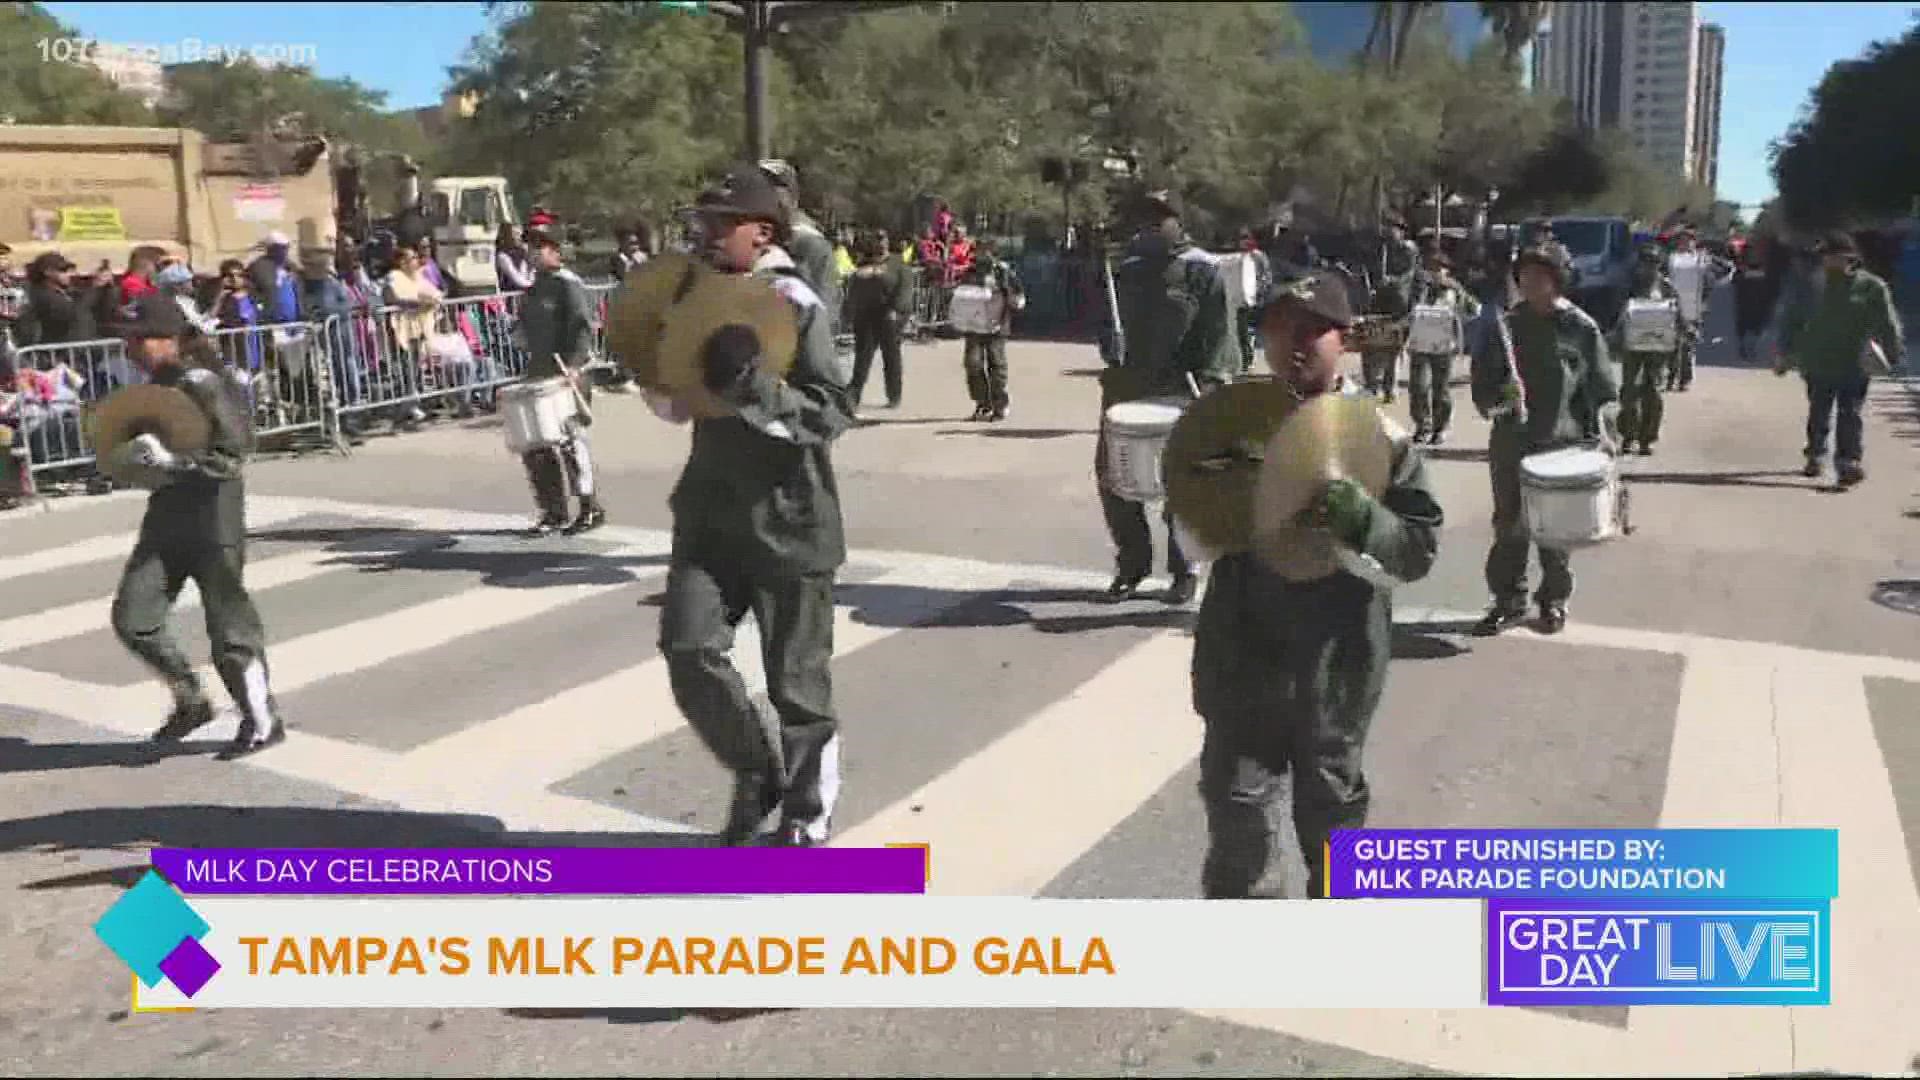 Tampa's tradition honoring Dr. King with a parade is back for 2022.